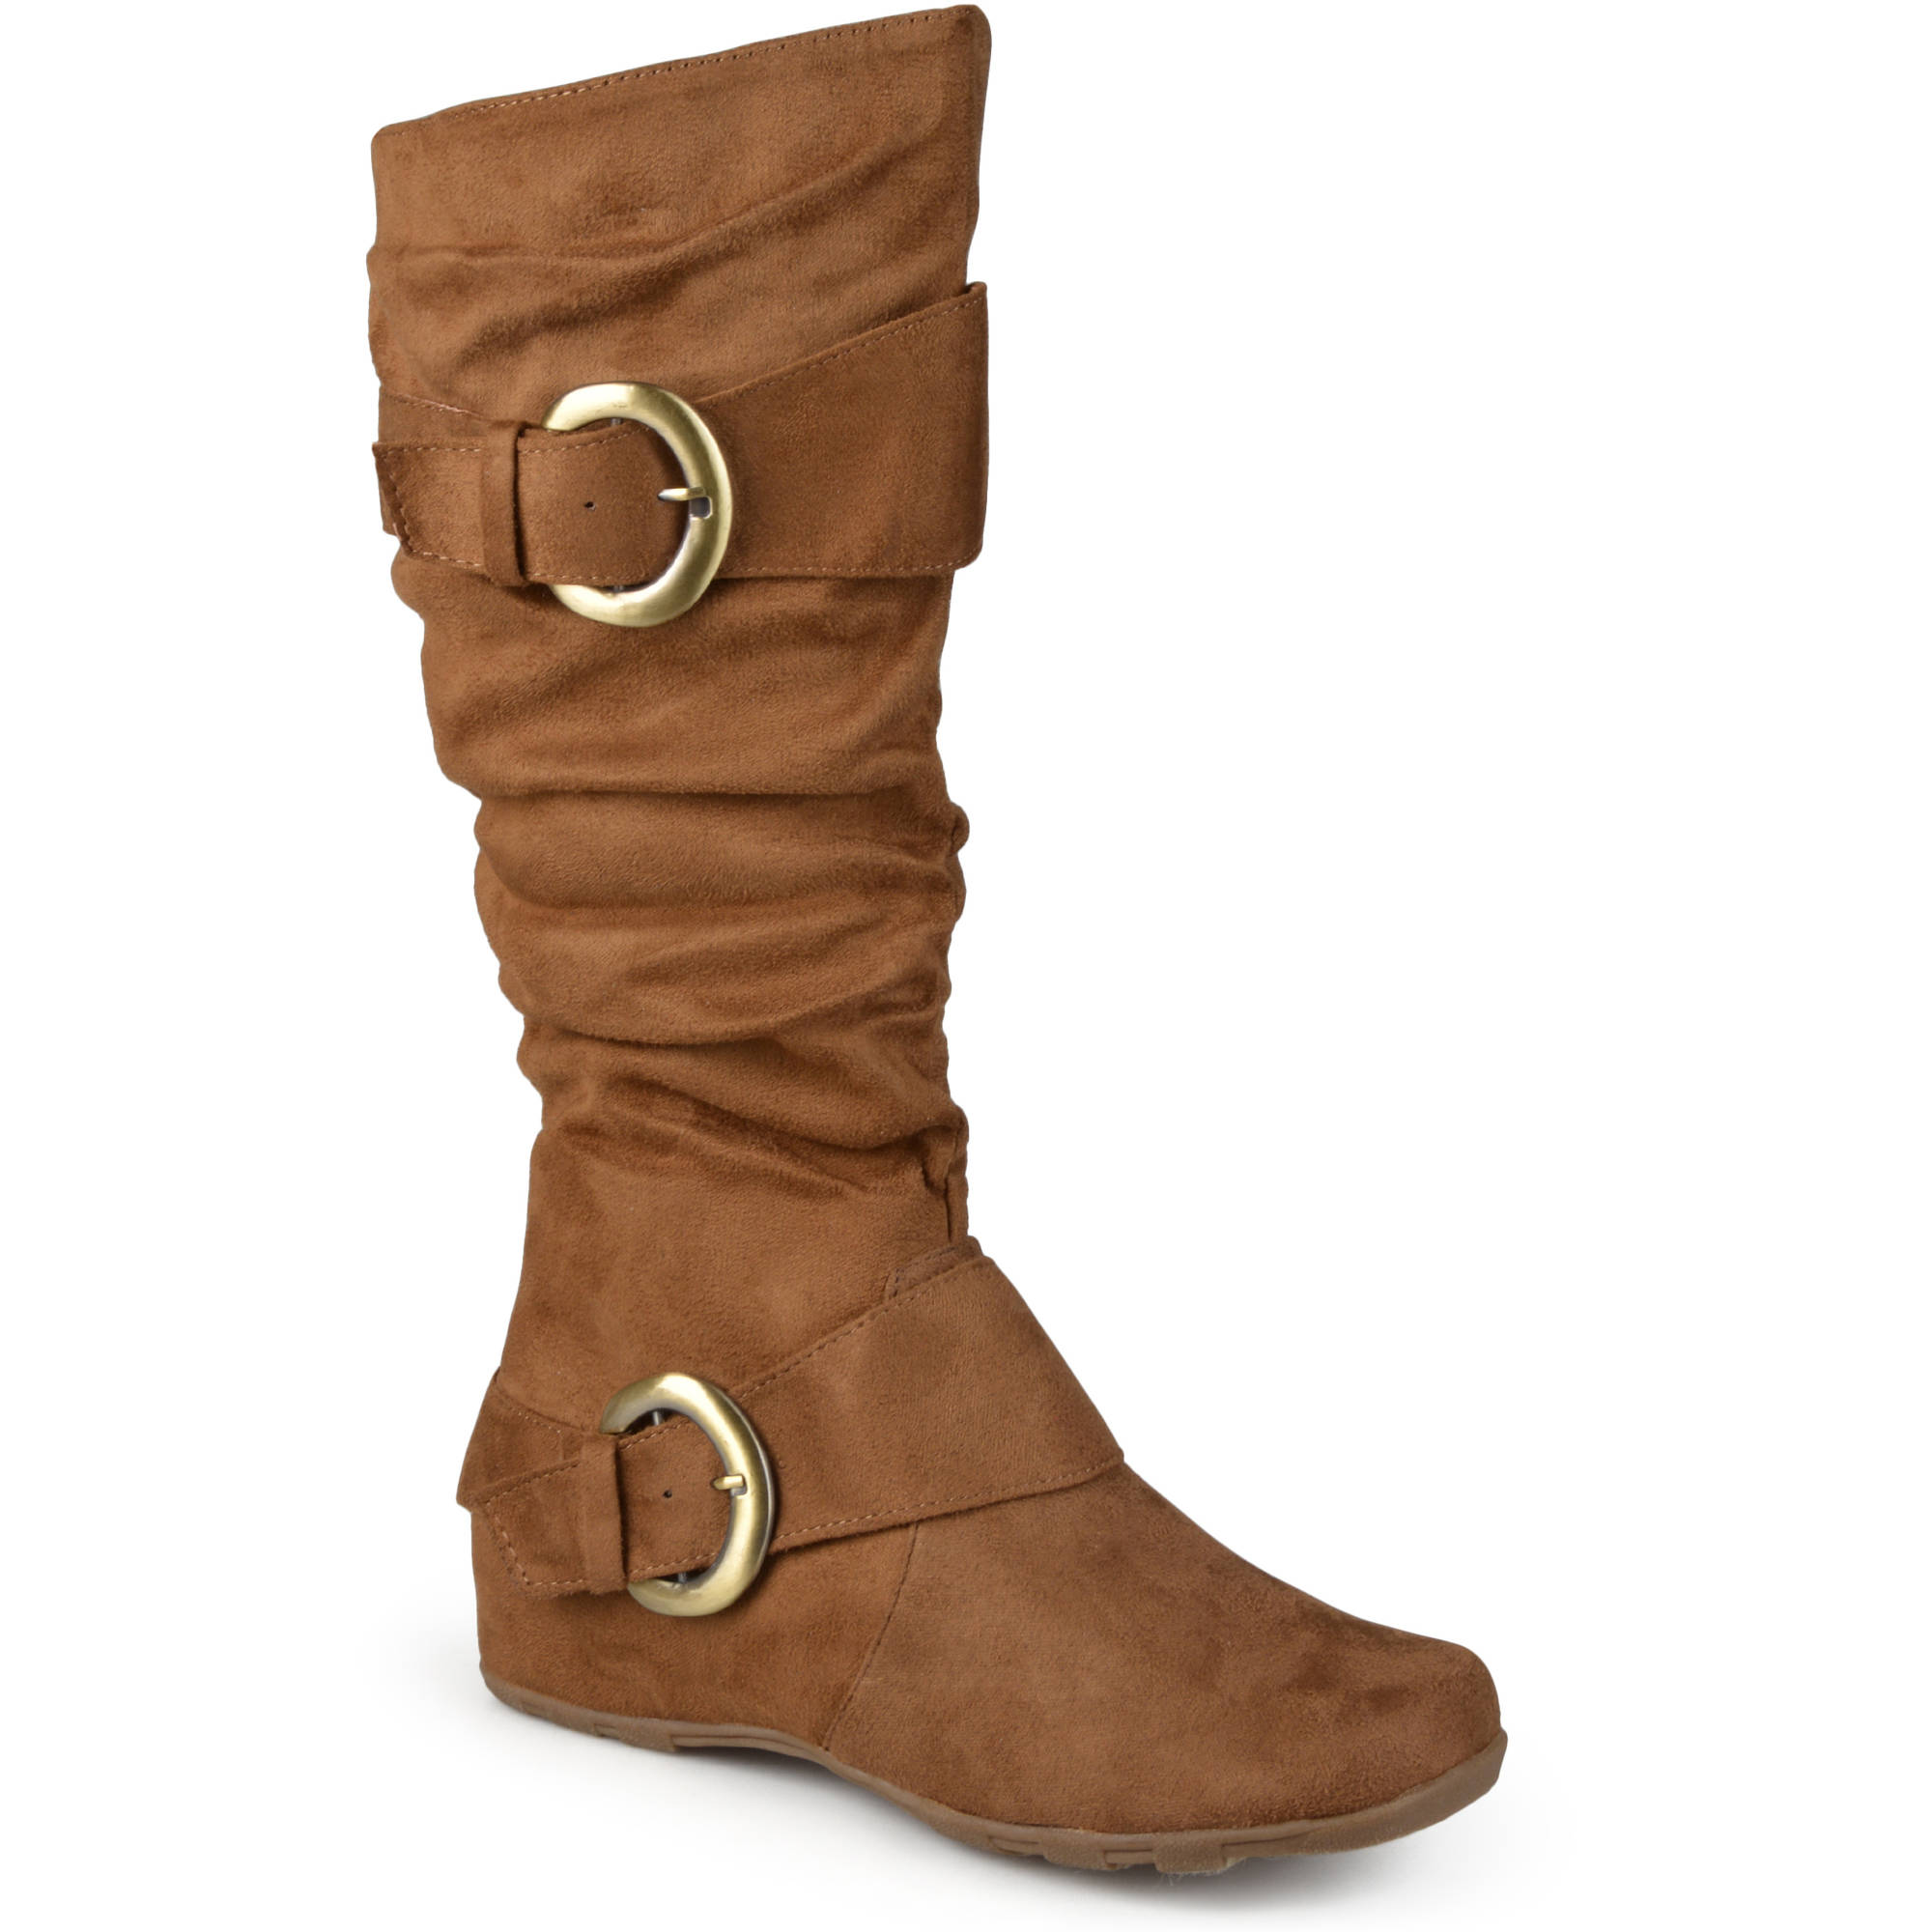 Brinley Co. Women's Buckle Accent Slouchy Mid-Calf Boots - image 1 of 9